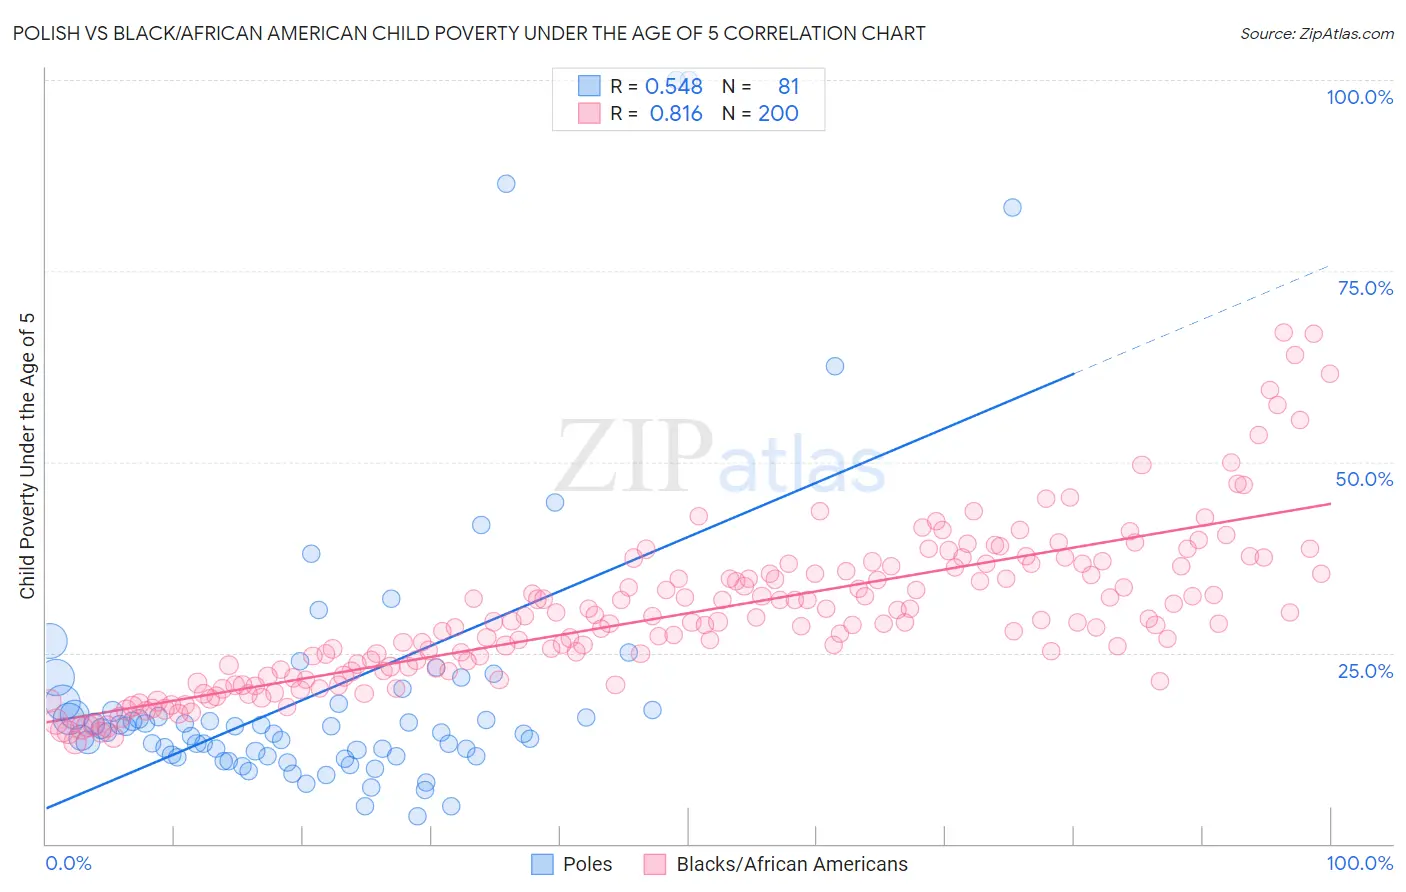 Polish vs Black/African American Child Poverty Under the Age of 5